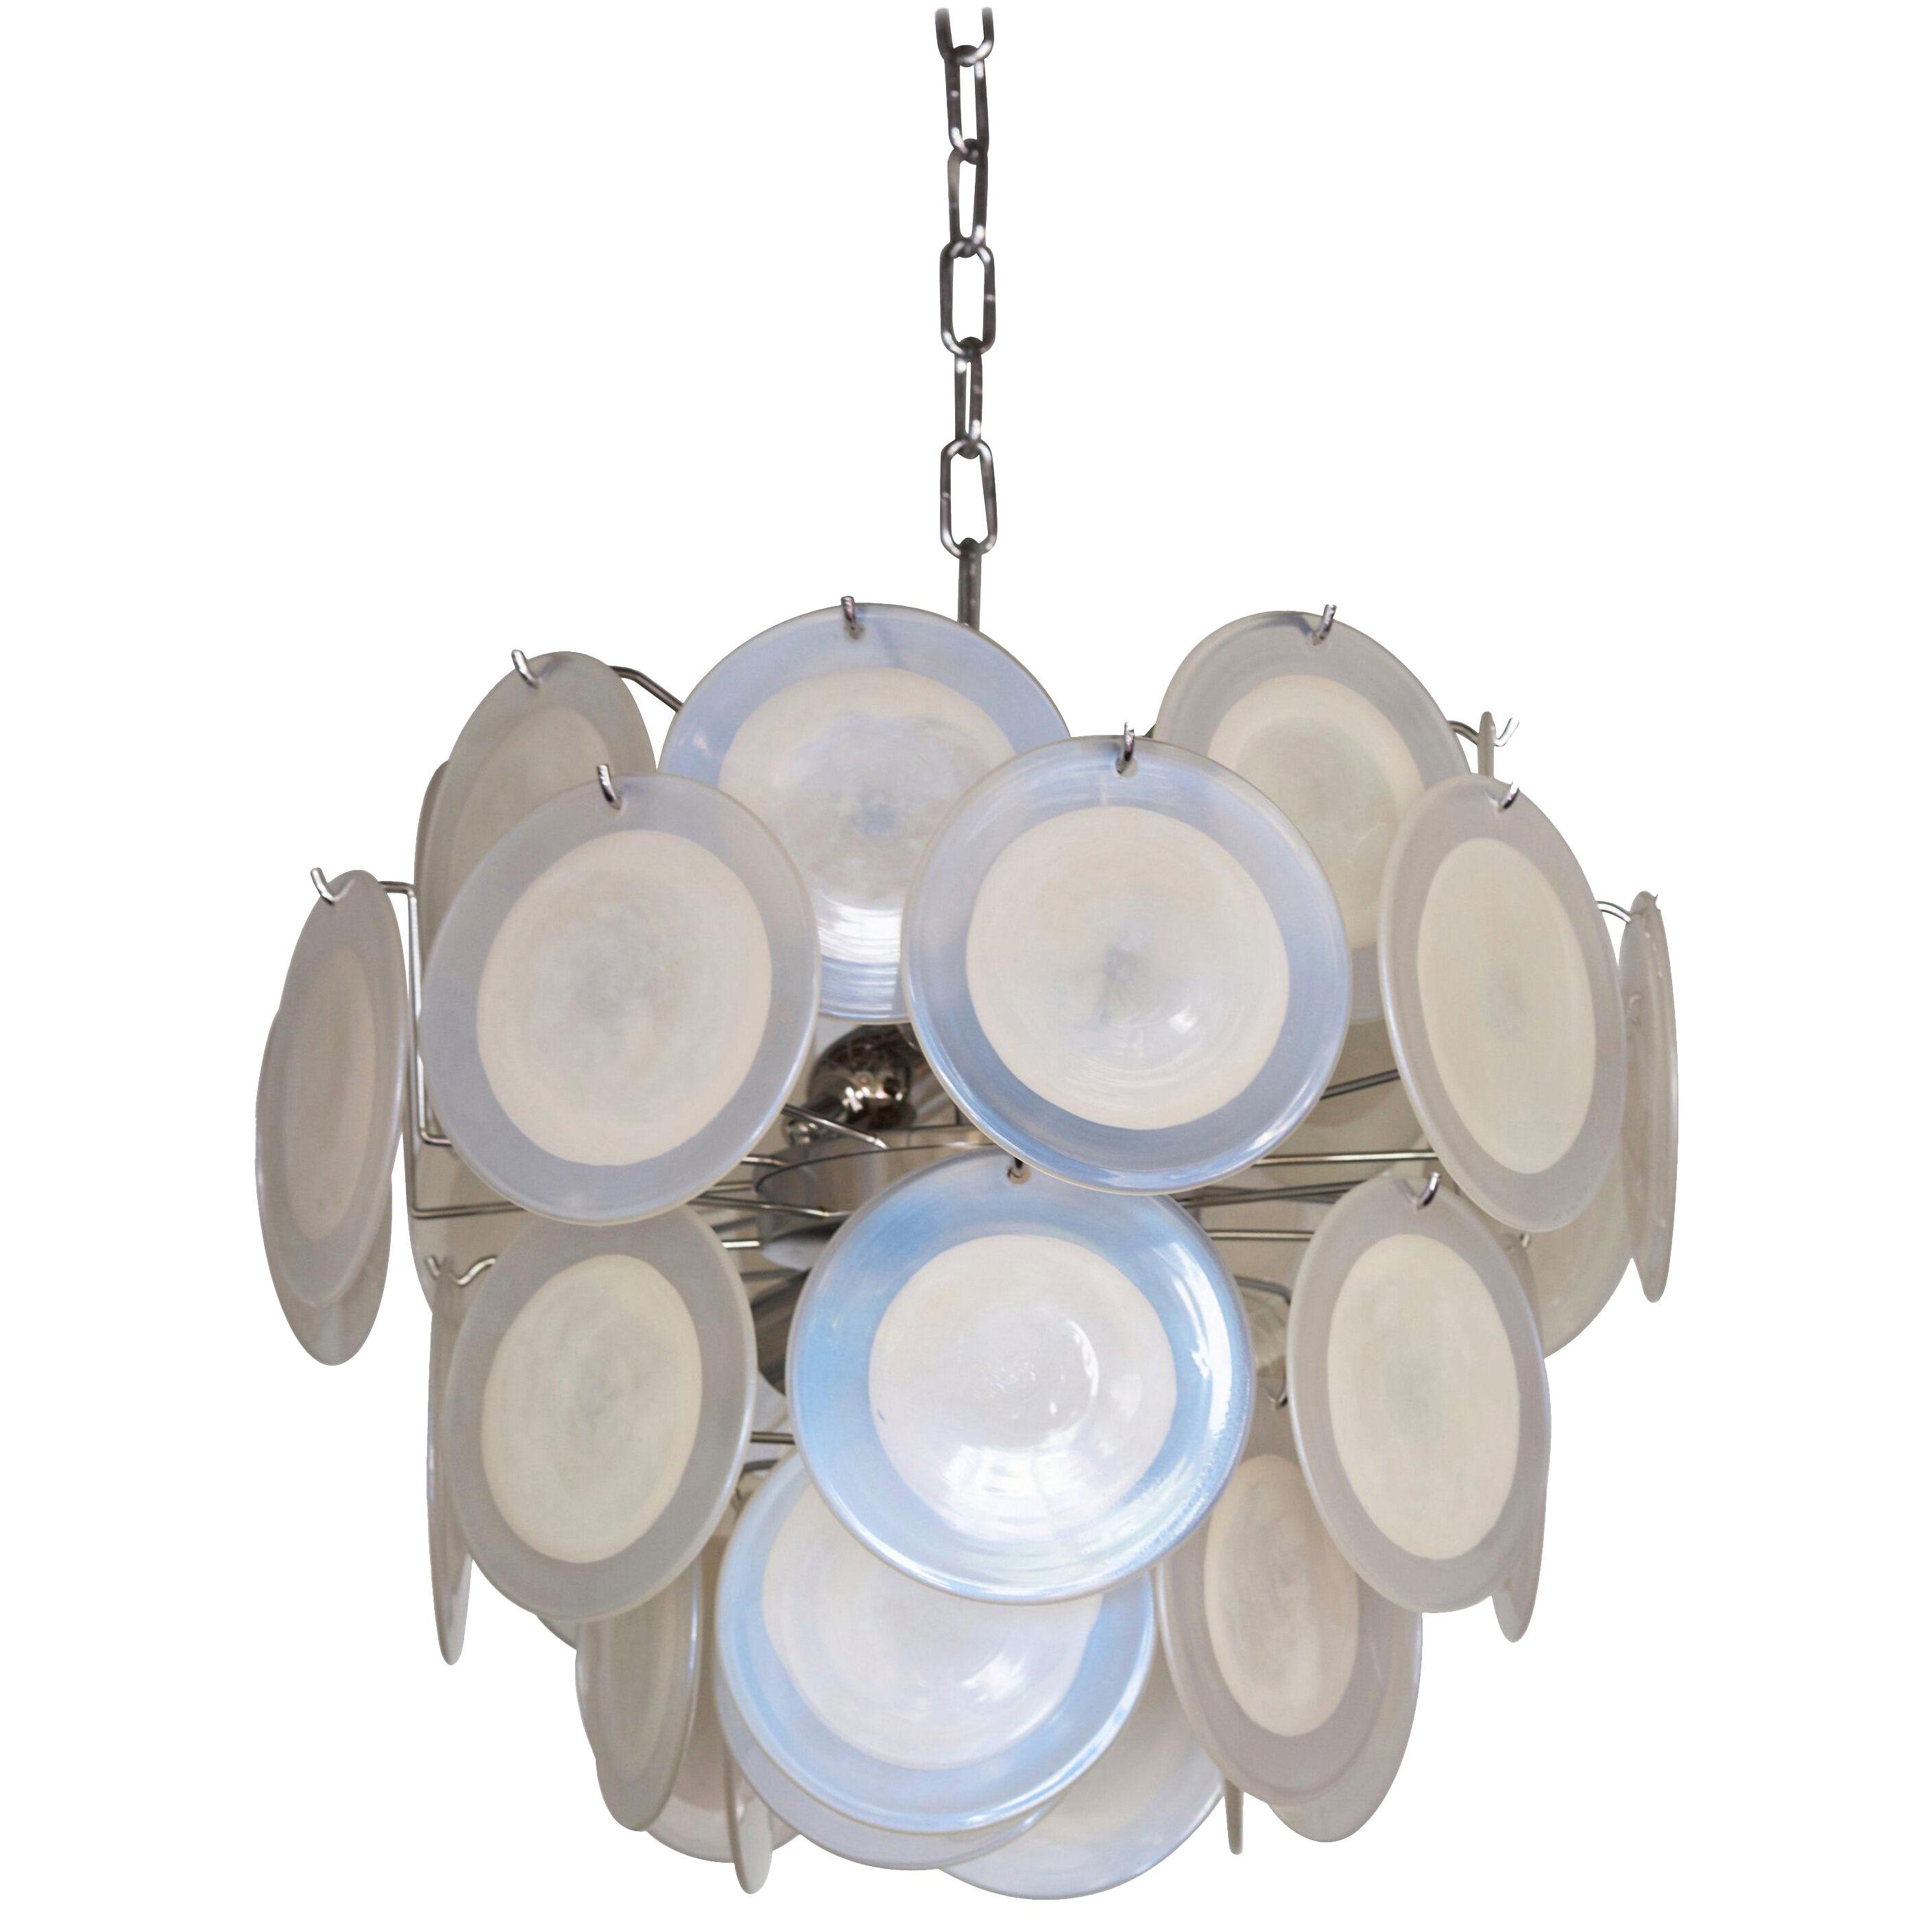 One of Two White Iridescent Murano Glass Disc Chandelier Attributed to Vistosi